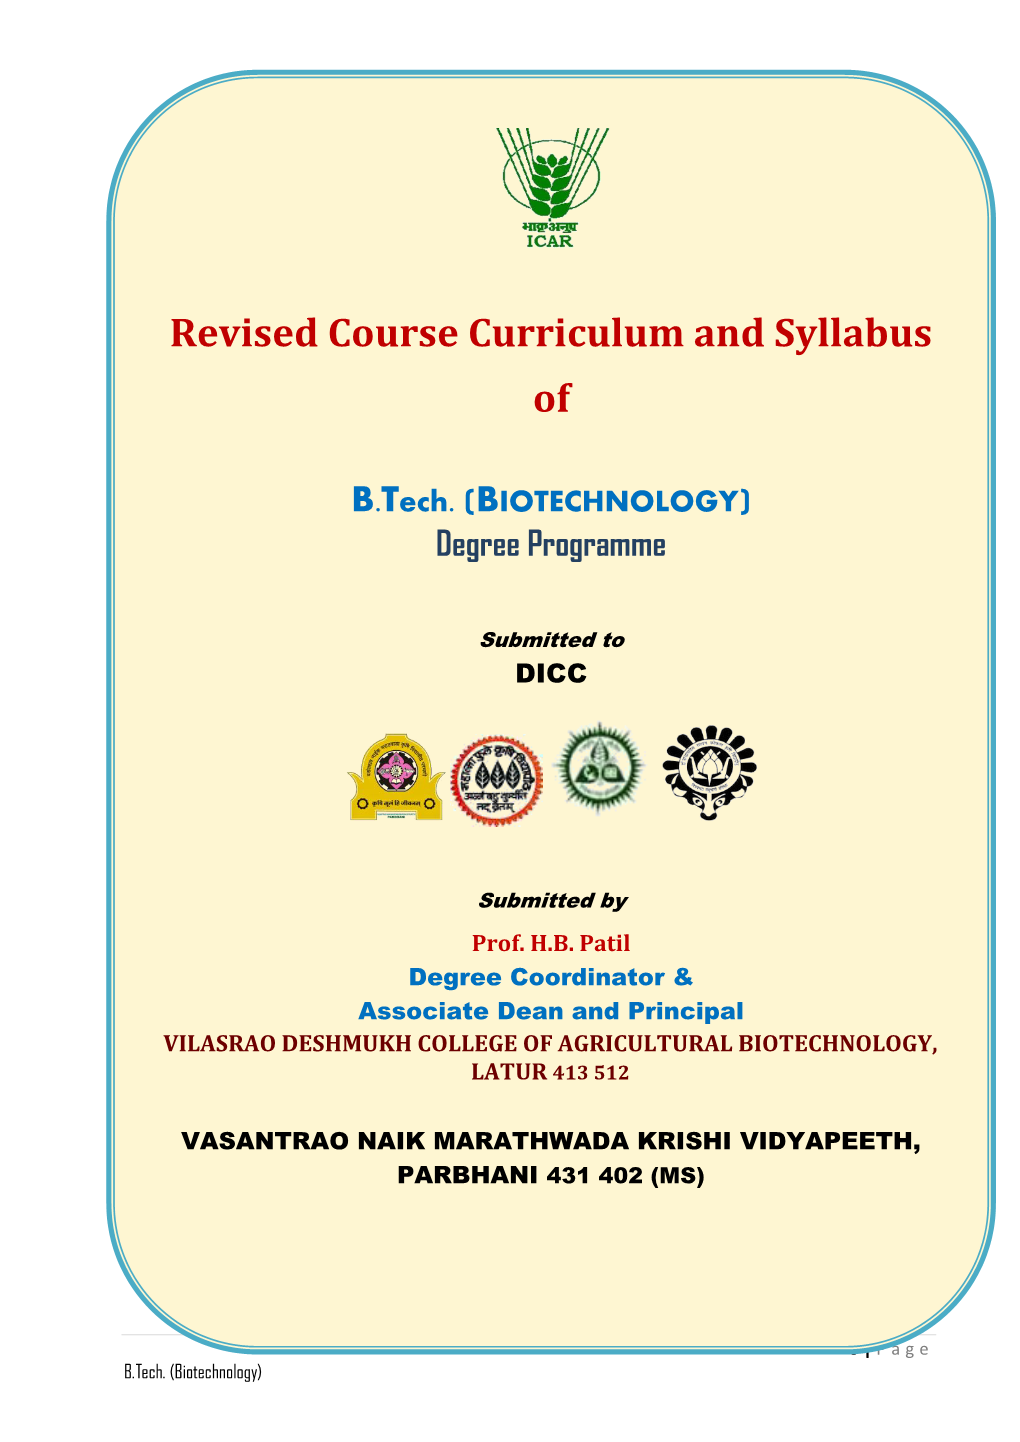 Revised Course Curriculum and Syllabus of B.Tech